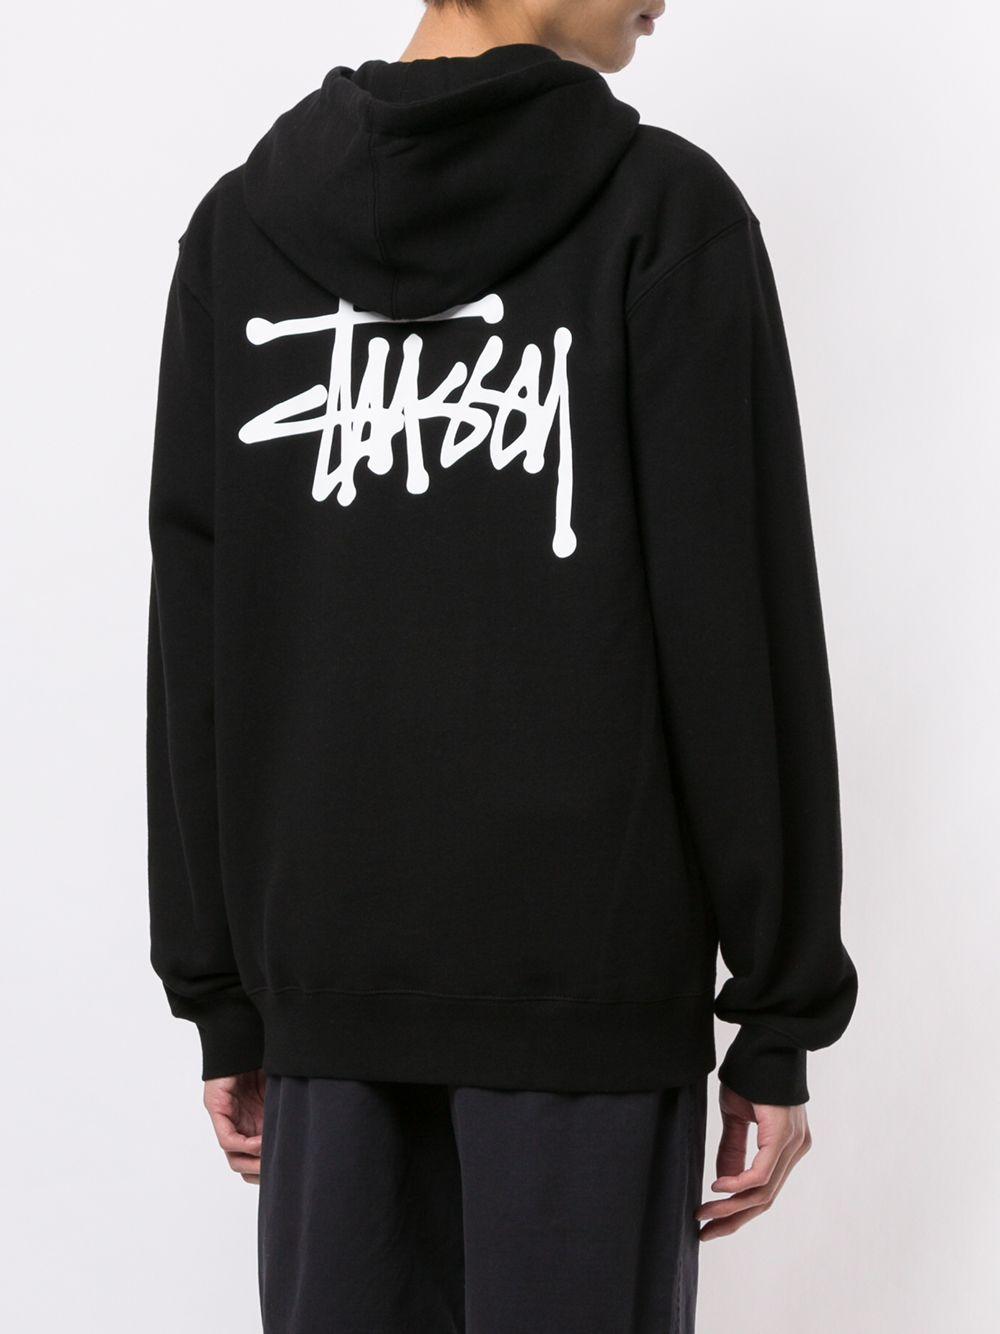 Stussy Cotton Logo Printed Zipped Hoodie in Black for Men - Lyst